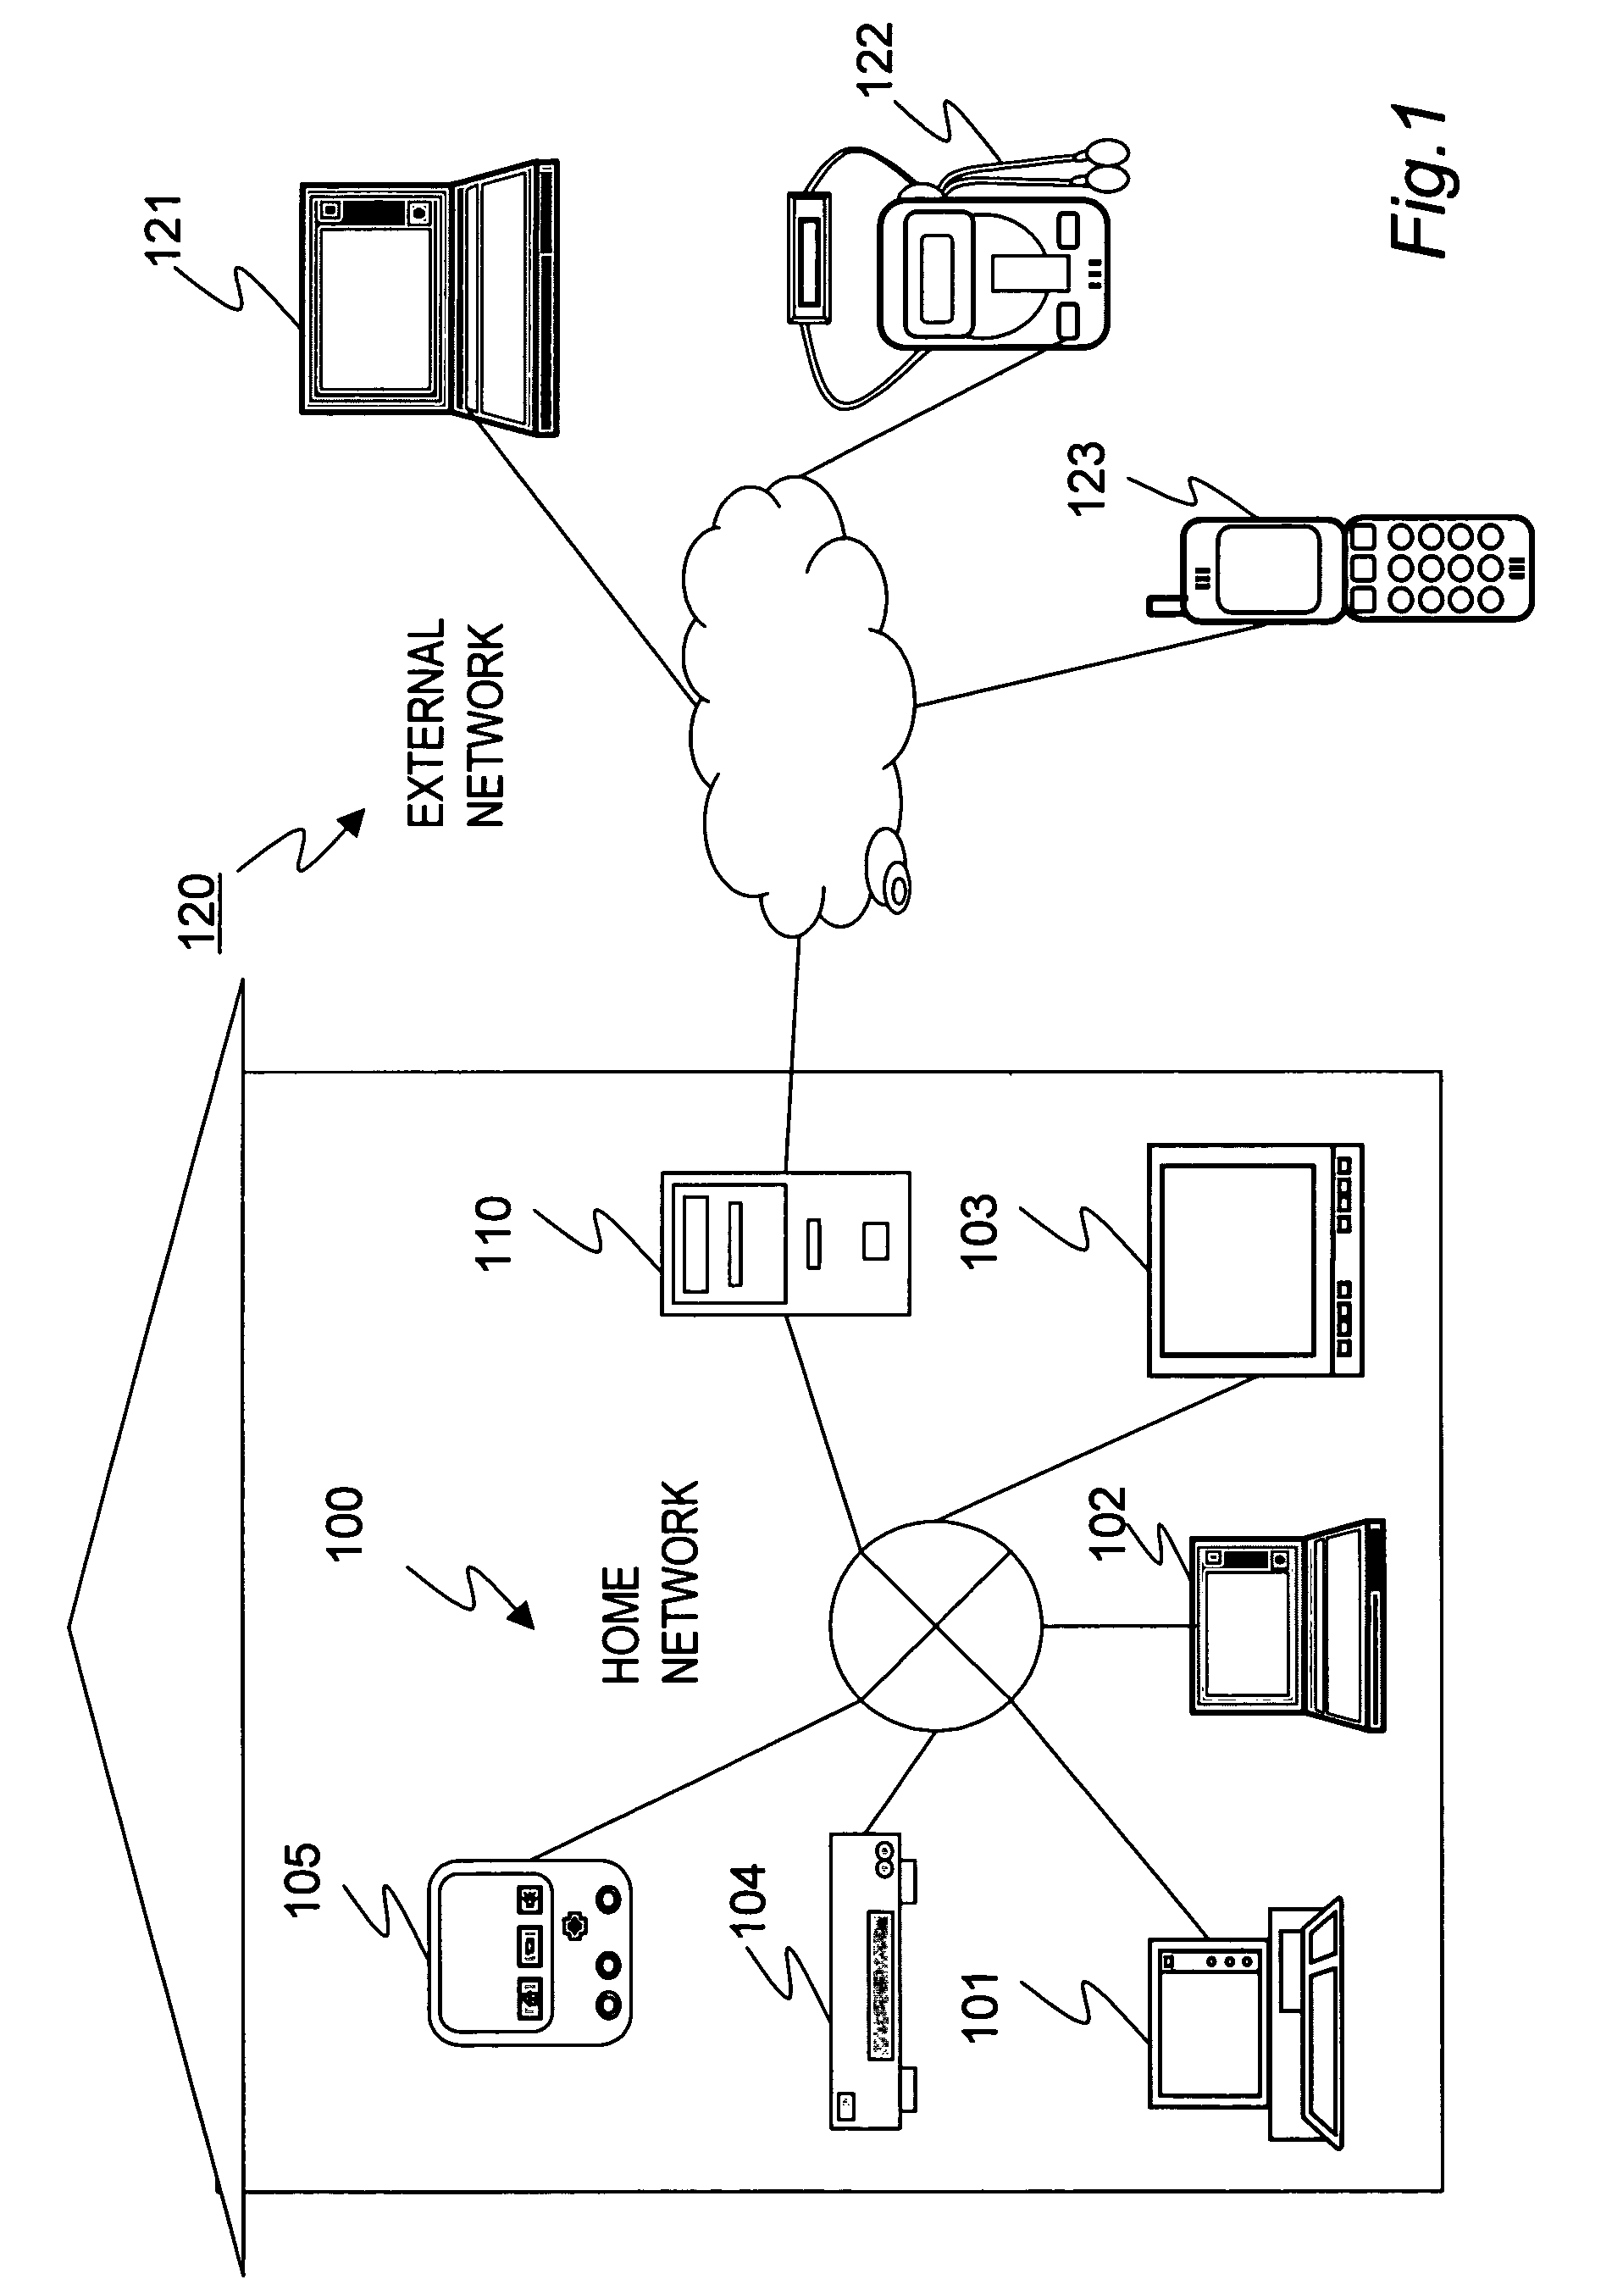 Information processing device, an information processing method, and a computer program to securely connect clients on an external network to devices within an internal network